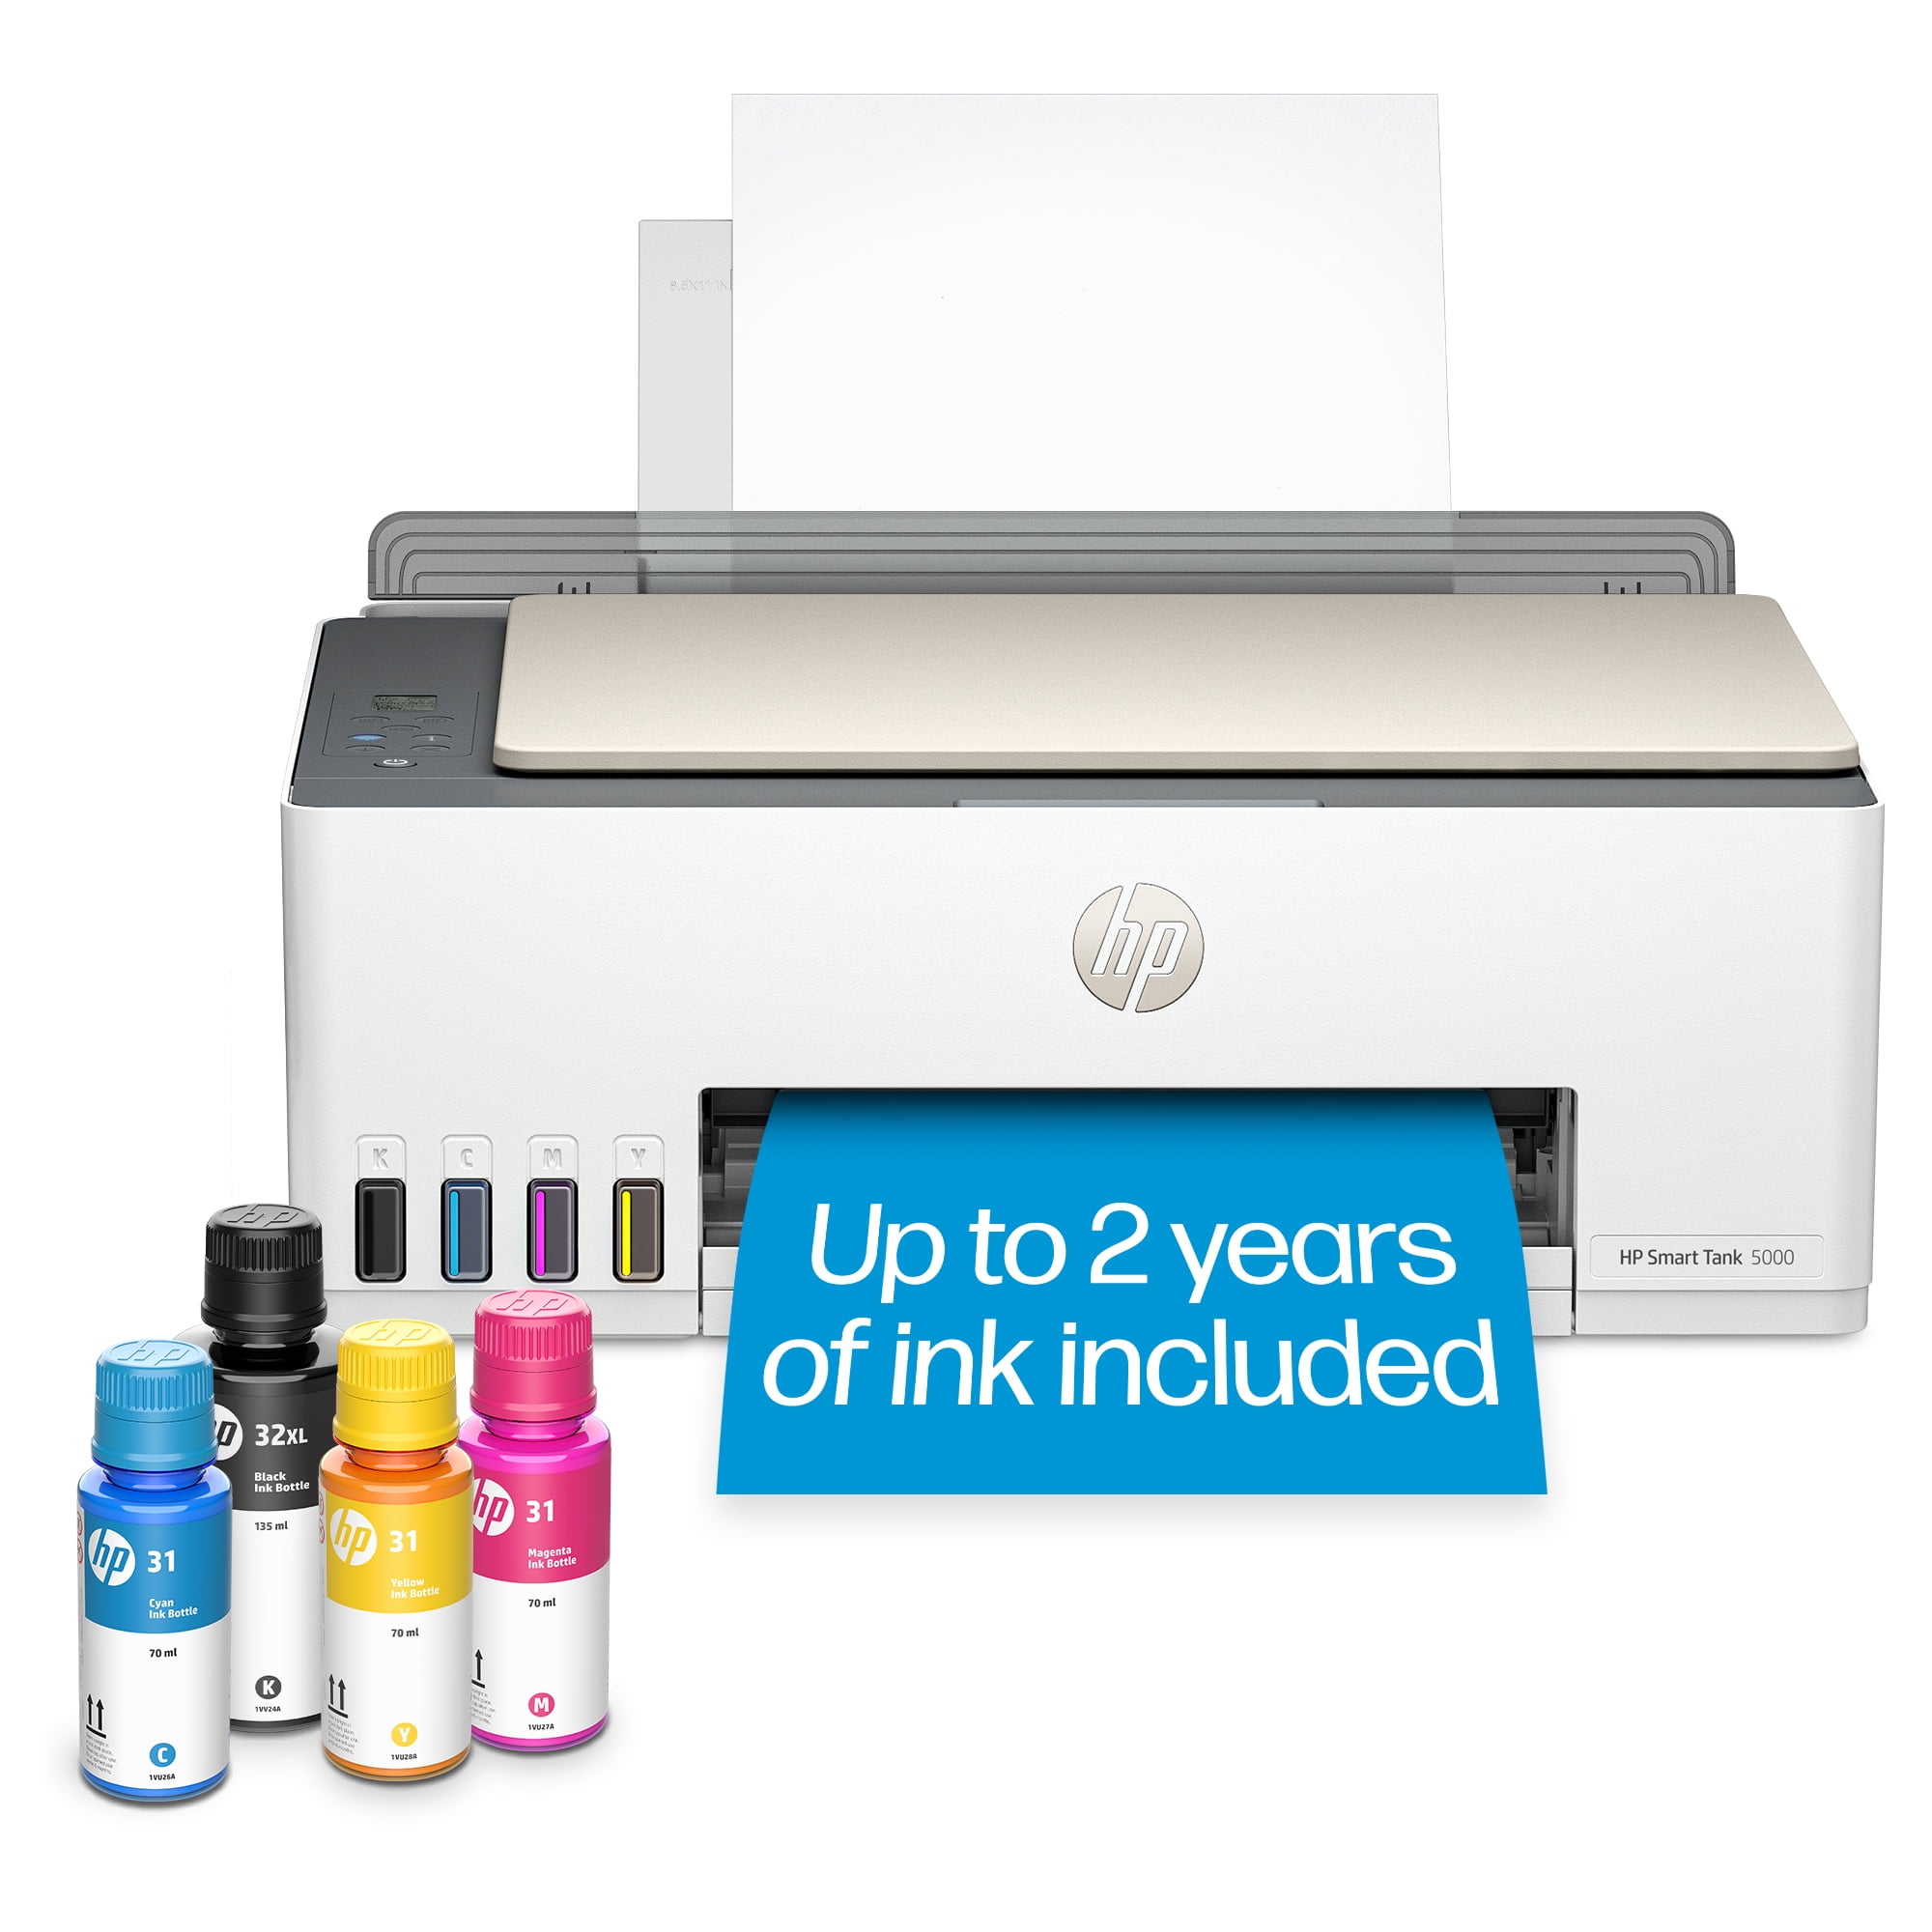 HP Smart Tank Printers launched in India for small businesses, homes